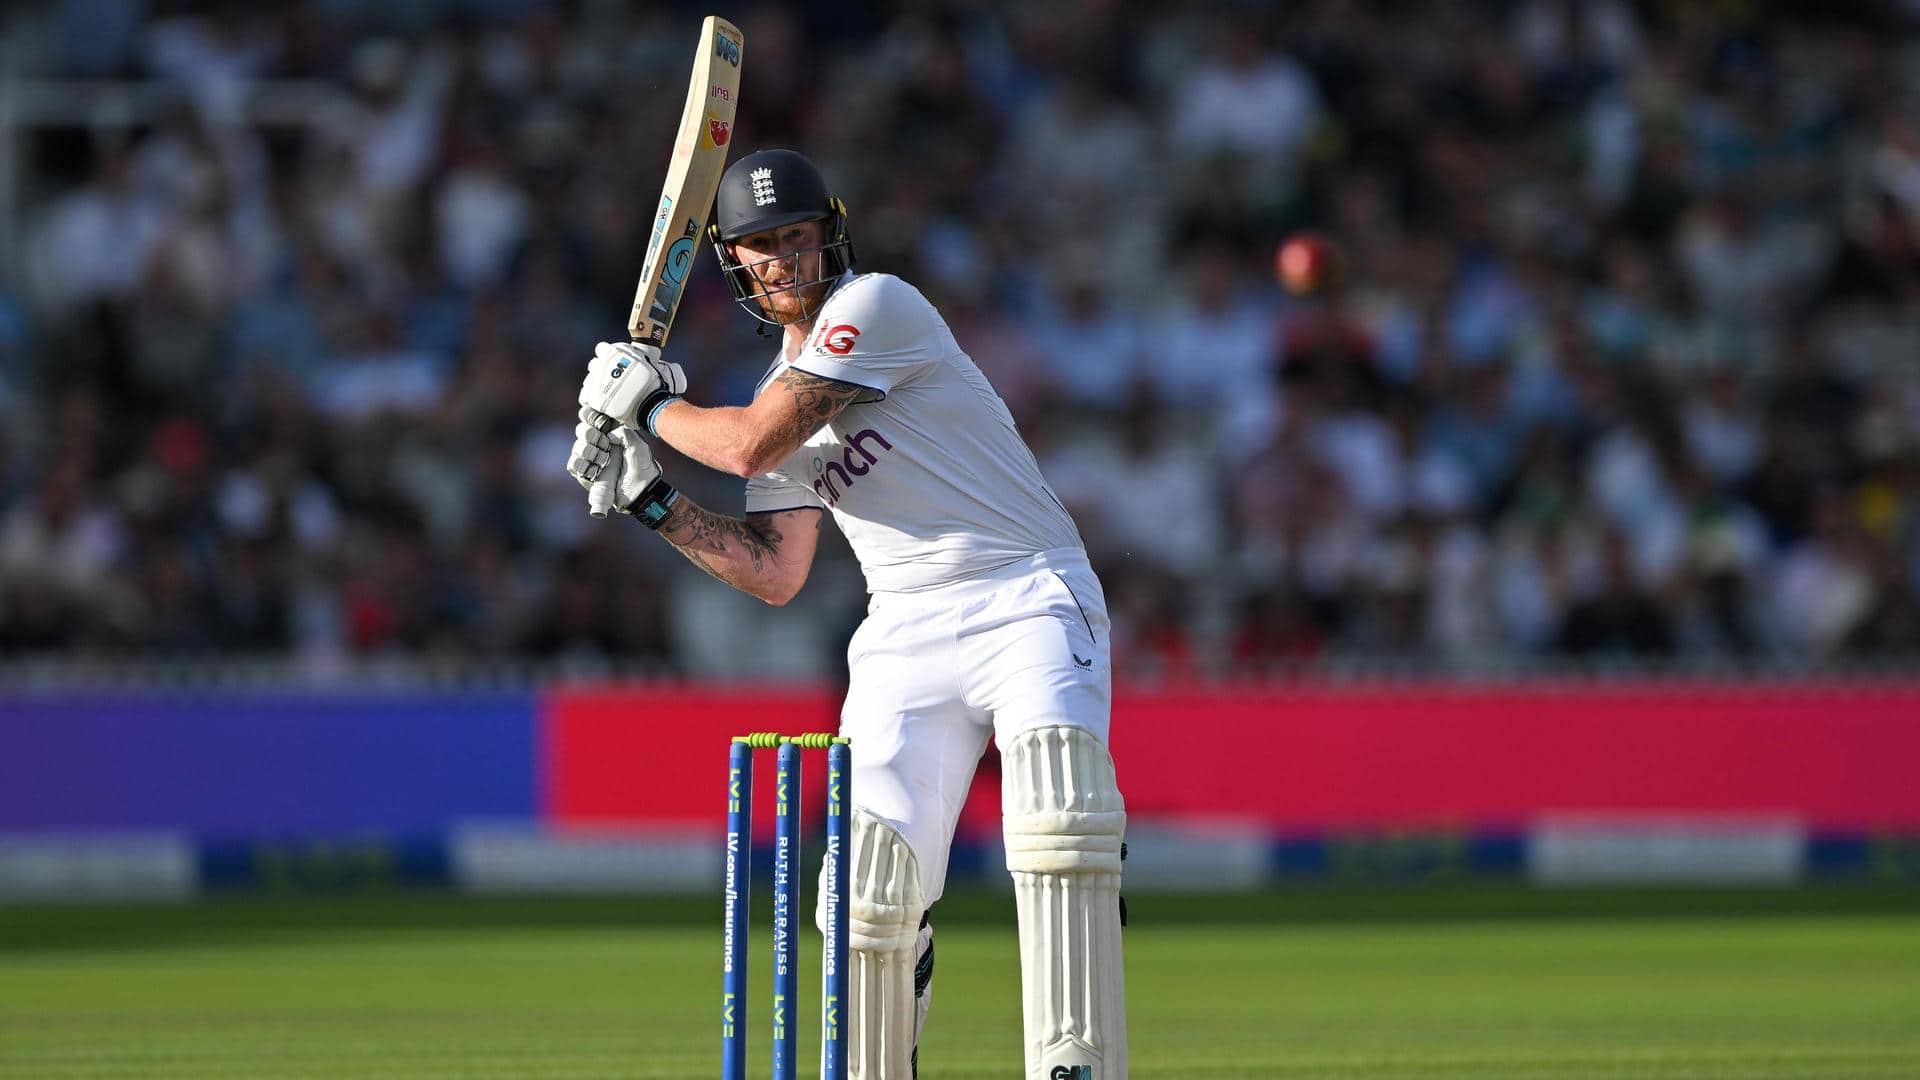 The Ashes: Ben Stokes slams match-defining century at Lord's 